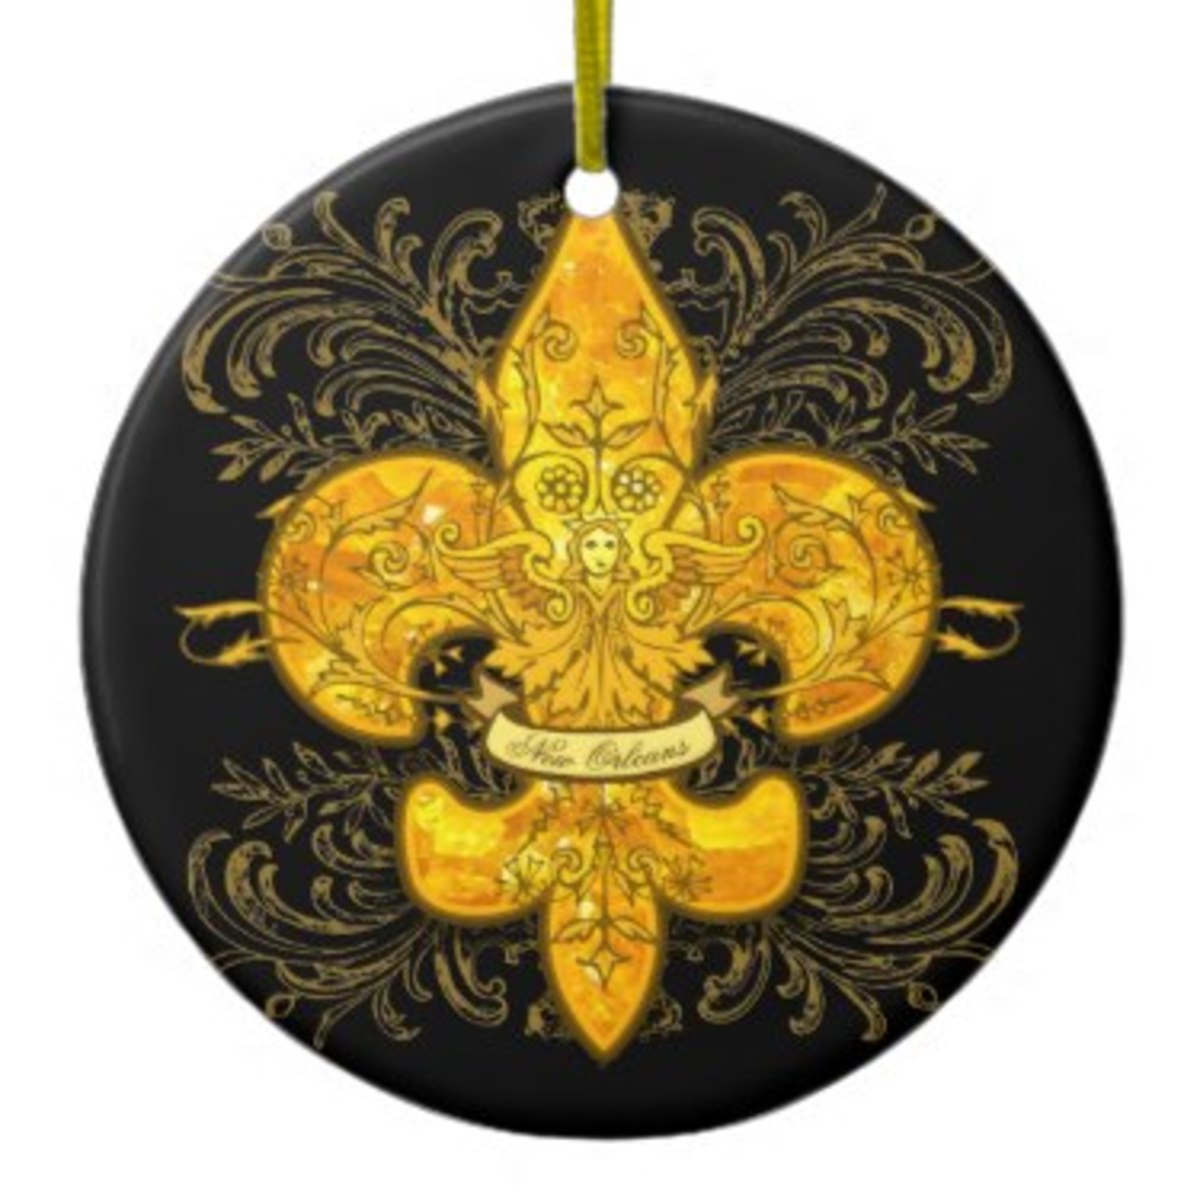 Many Christmas trees are decorated with black and gold Fleur de lis ornaments such as this Fleur de Guardian one.